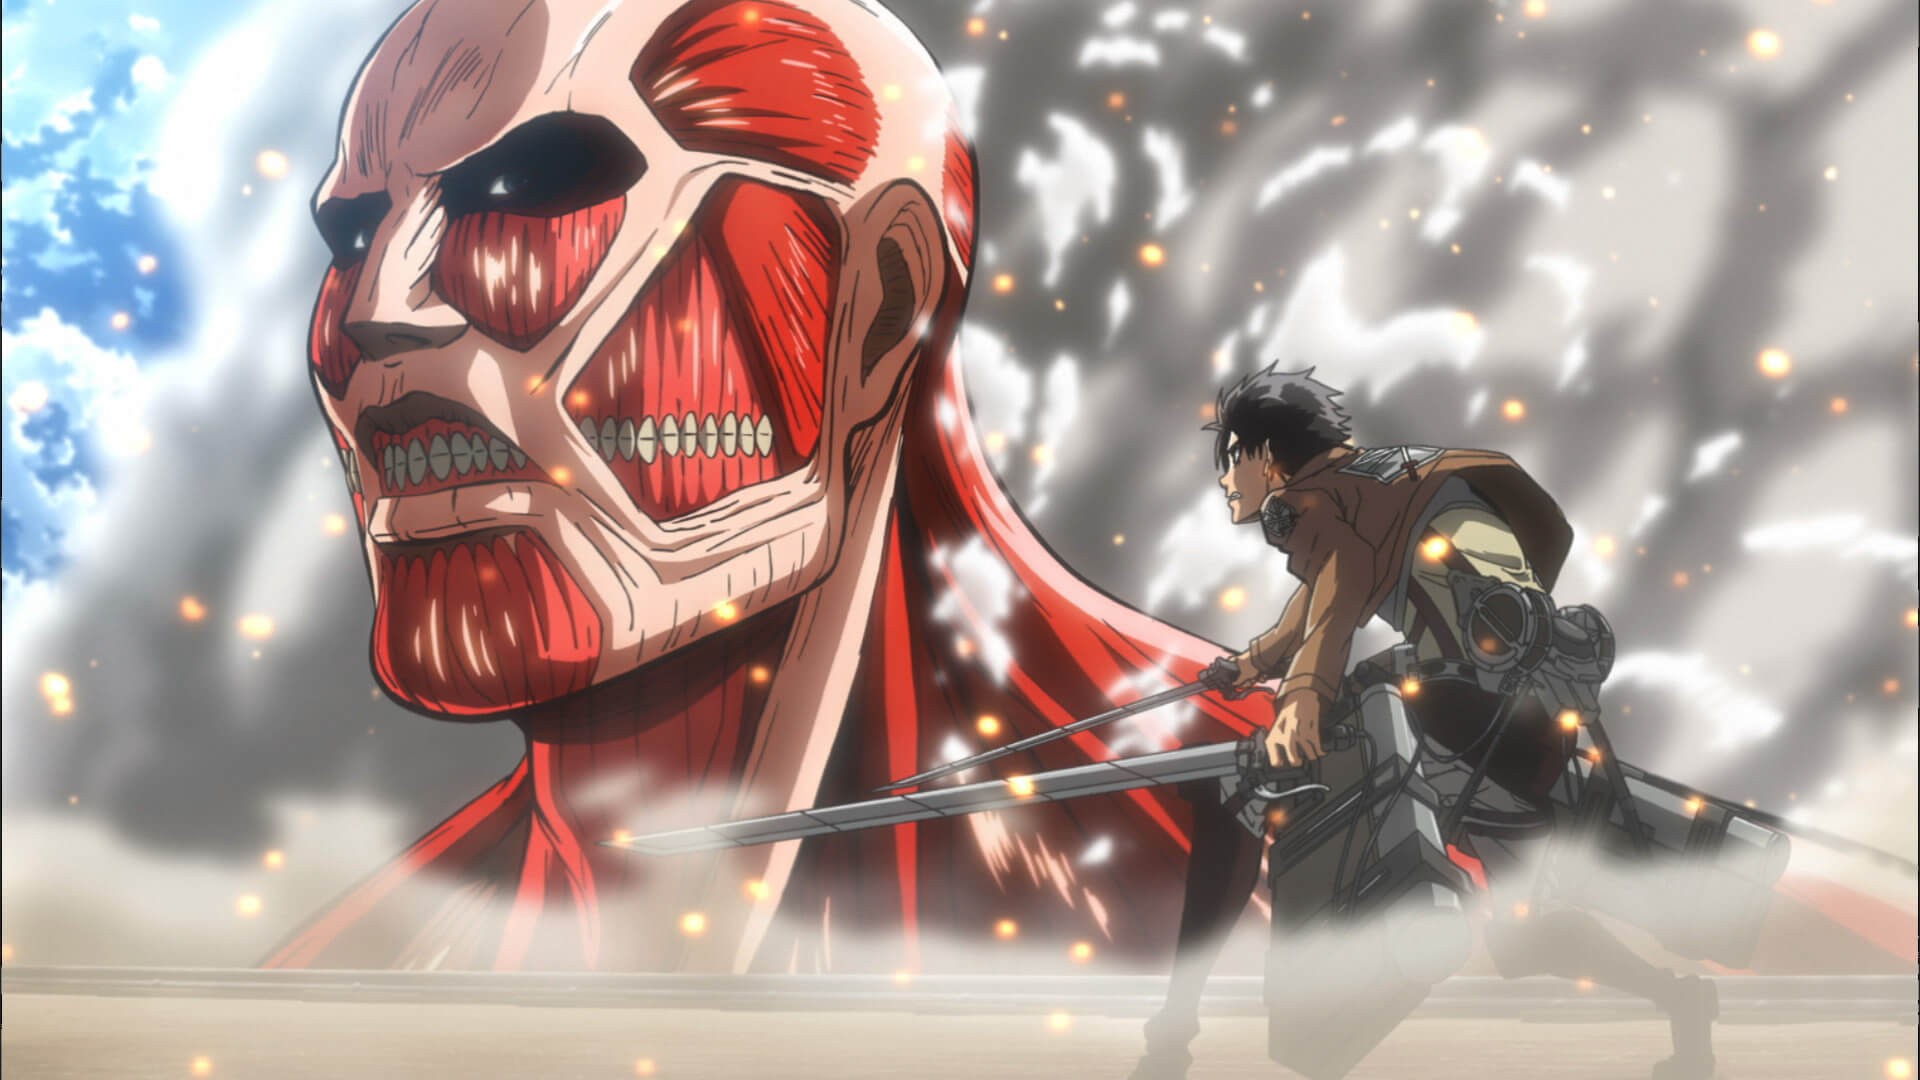 Everyone Loves Attack on Titan. So Why Does Everyone Hate Attack on Titan?